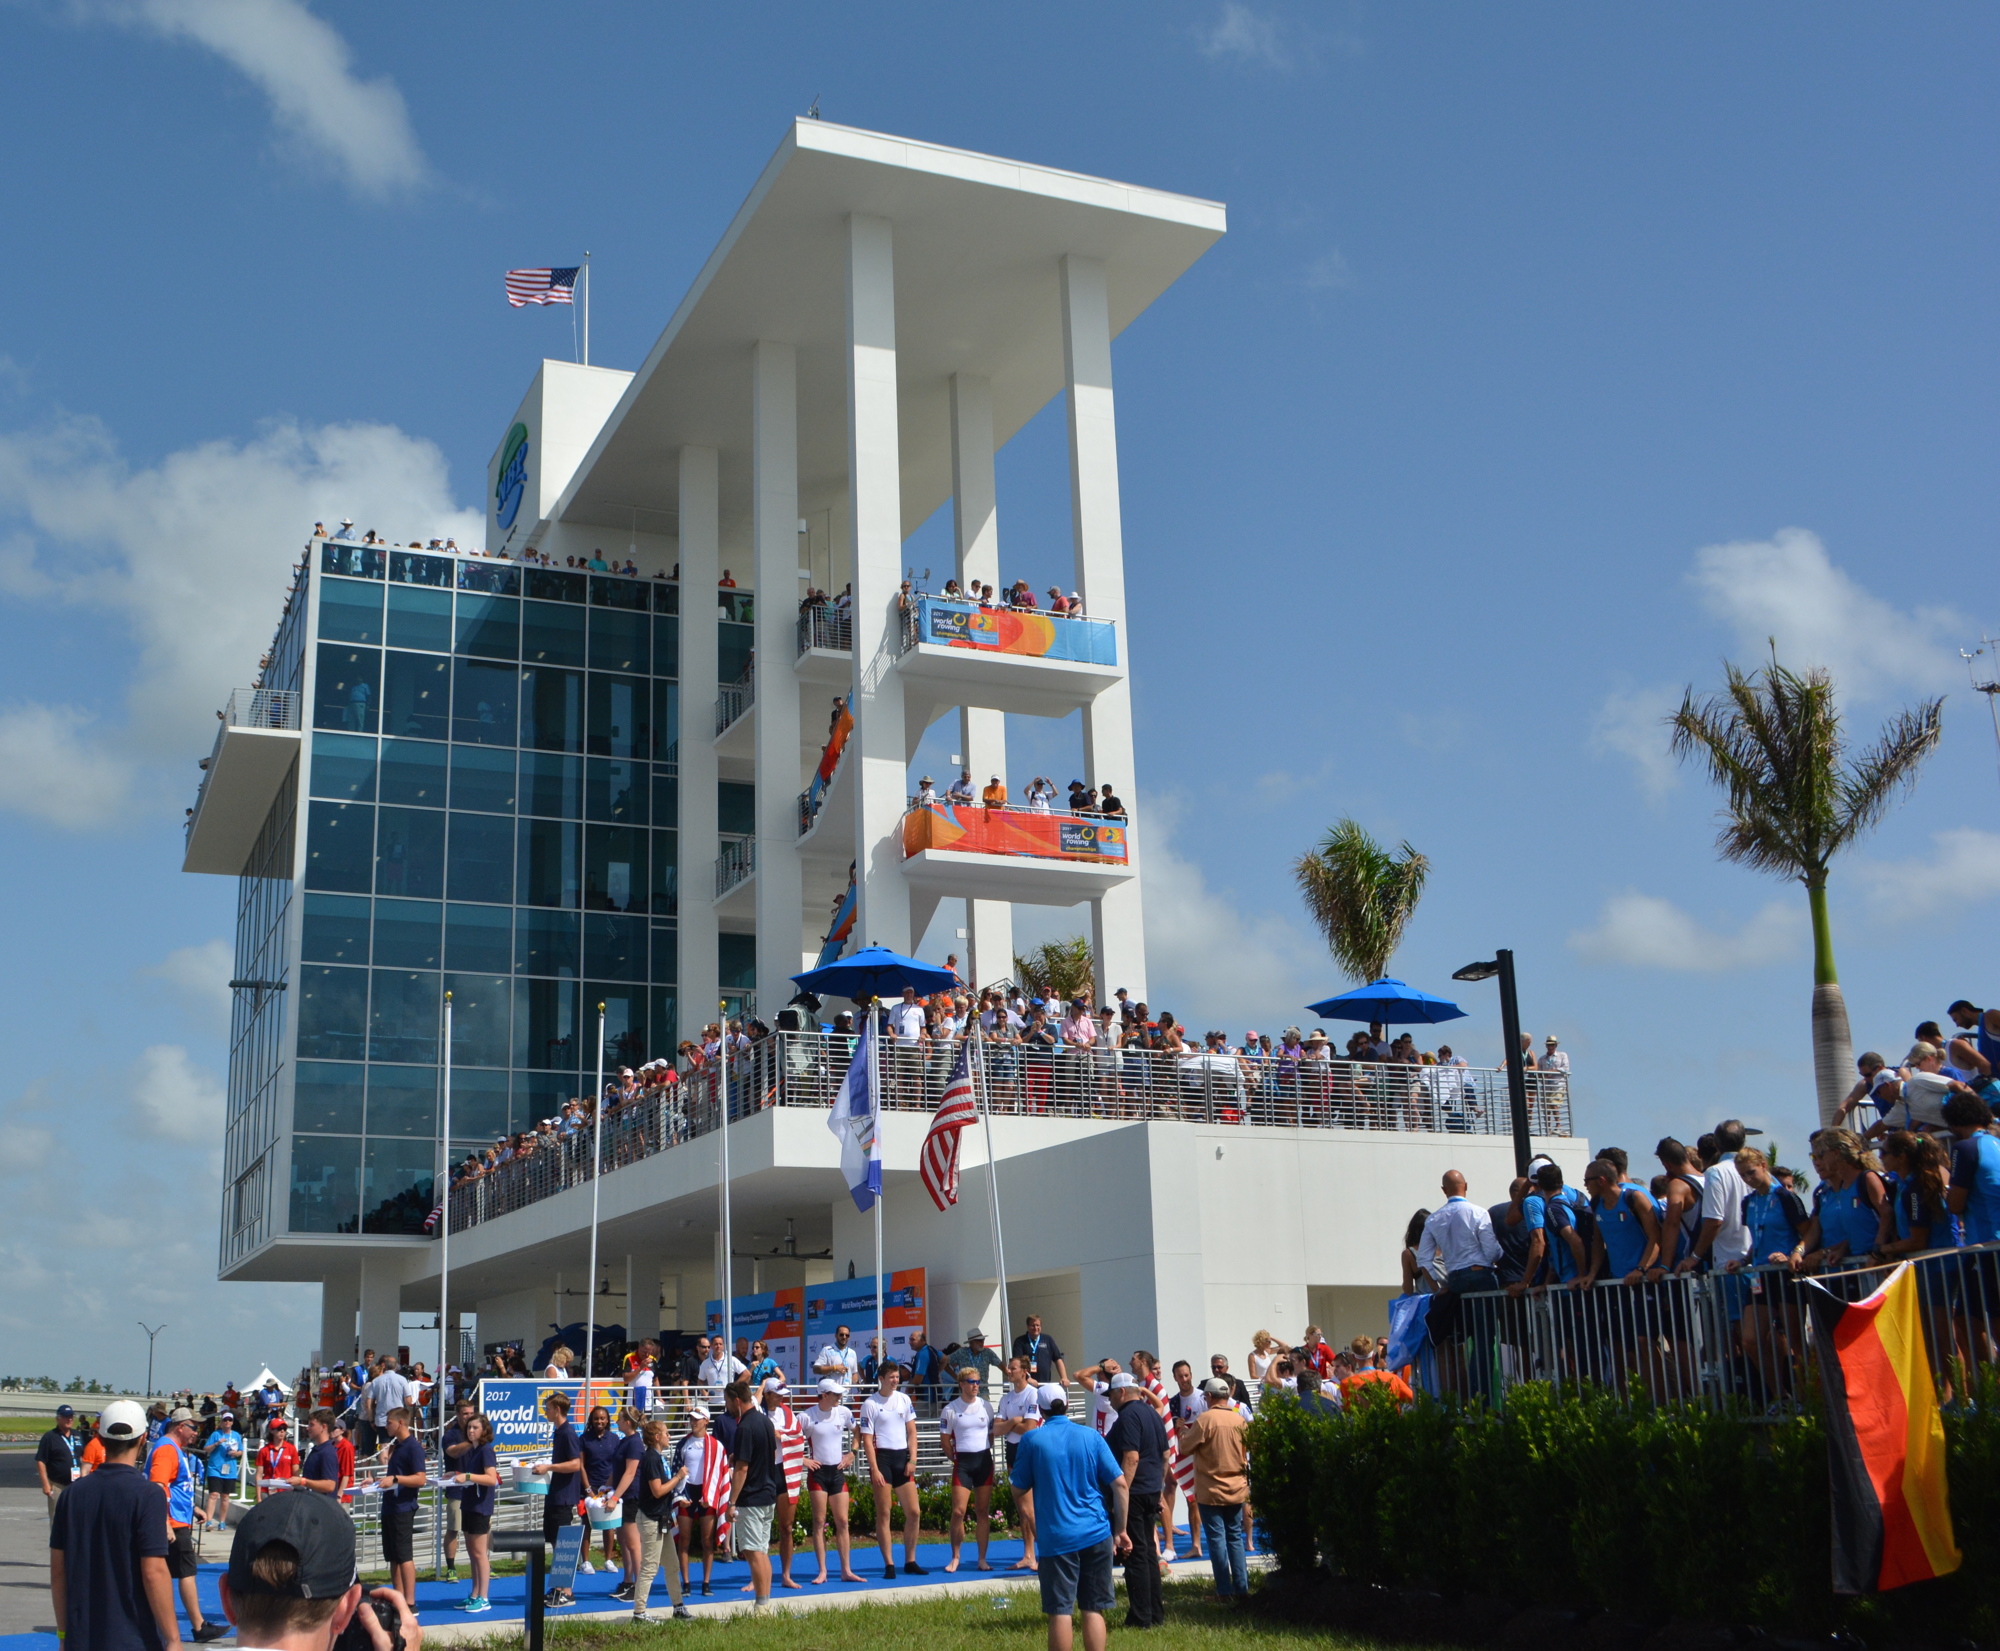 While the finish tower was built at Nathan Benderson Park, the long-planned boathouse/events center has floundered.